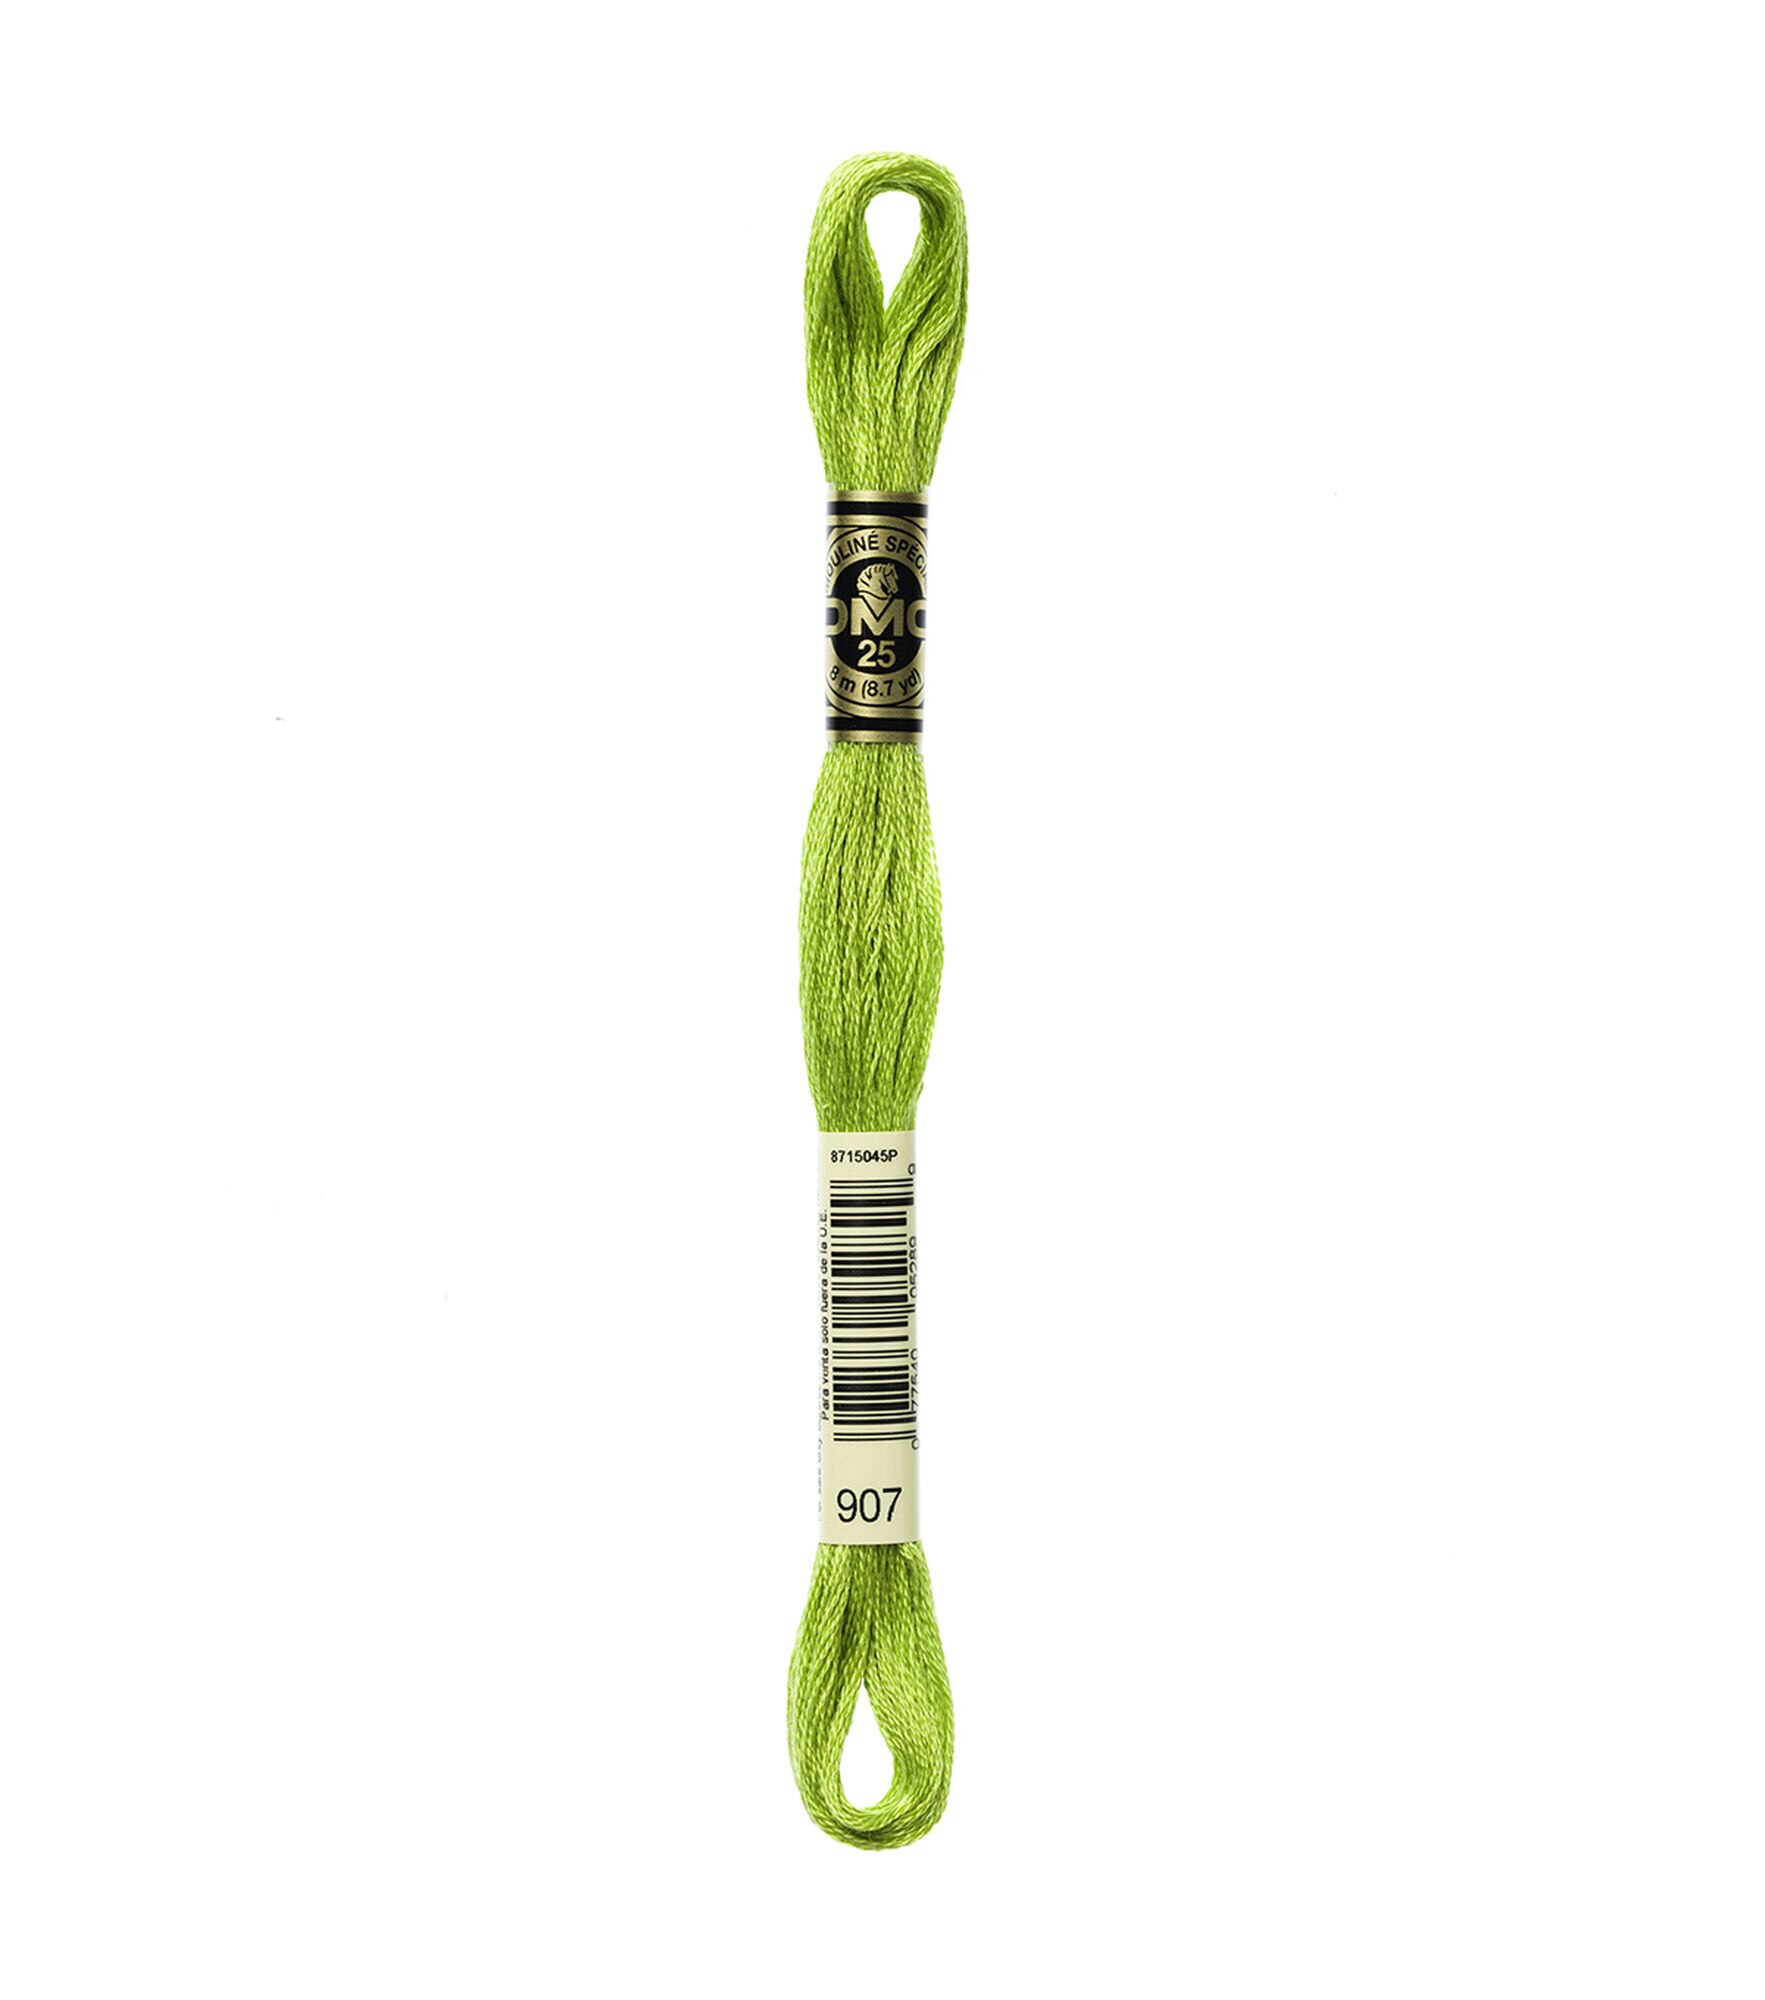 DMC 8.7yd Greens 6 Strand Cotton Embroidery Floss, 907 Light Parrot Gree, hi-res